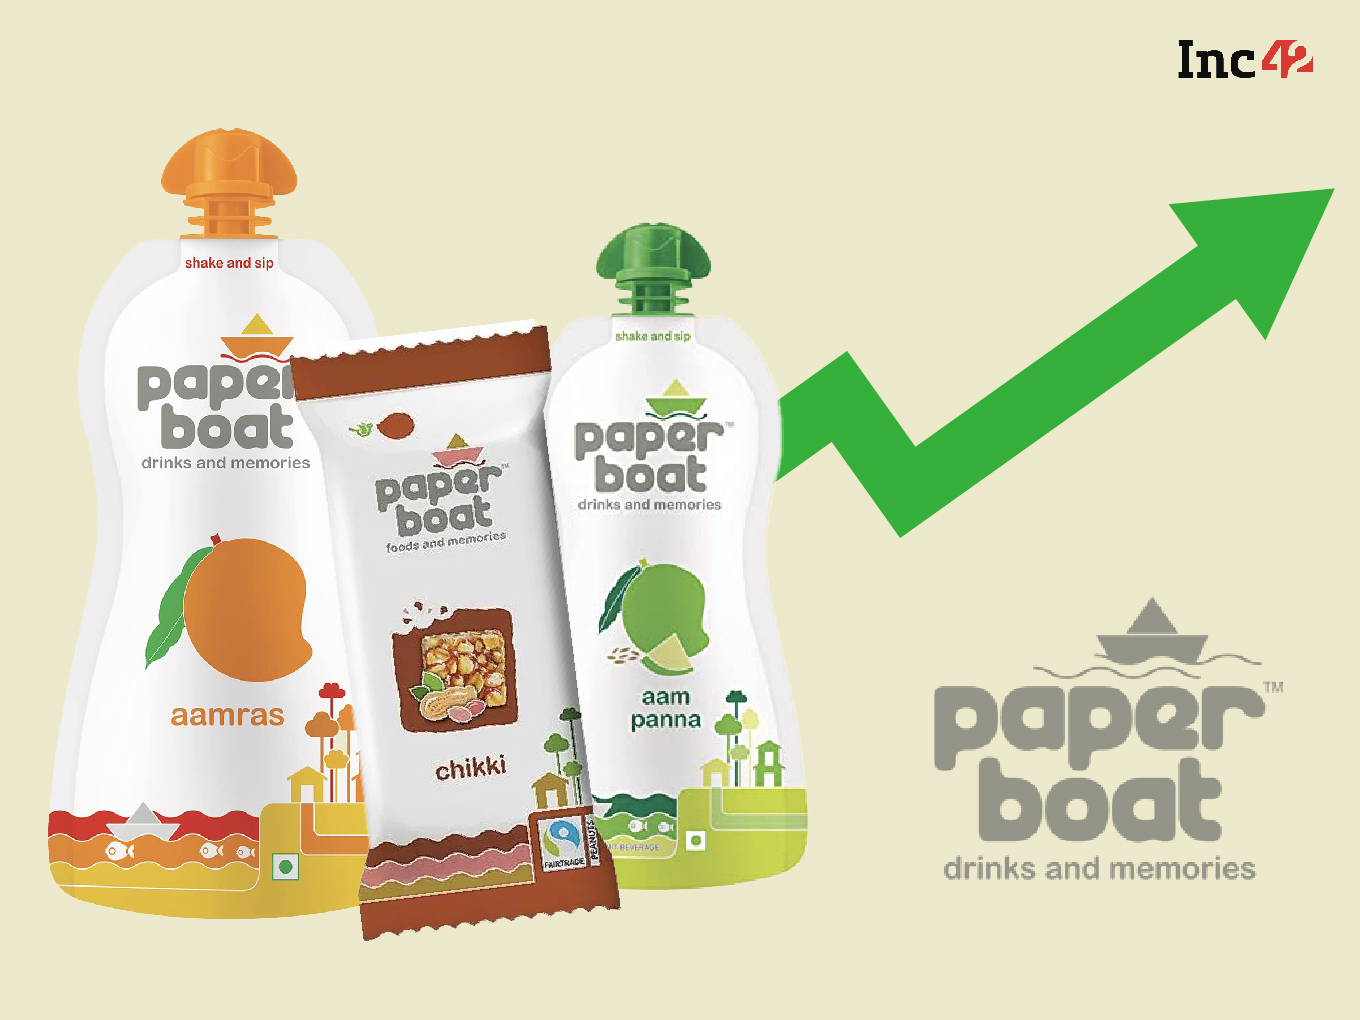 Paper Boat's Nostalgic Revival How Traditional Recipes and Creative Branding Led to FY 23 Revenues Exceeding 300 Cr